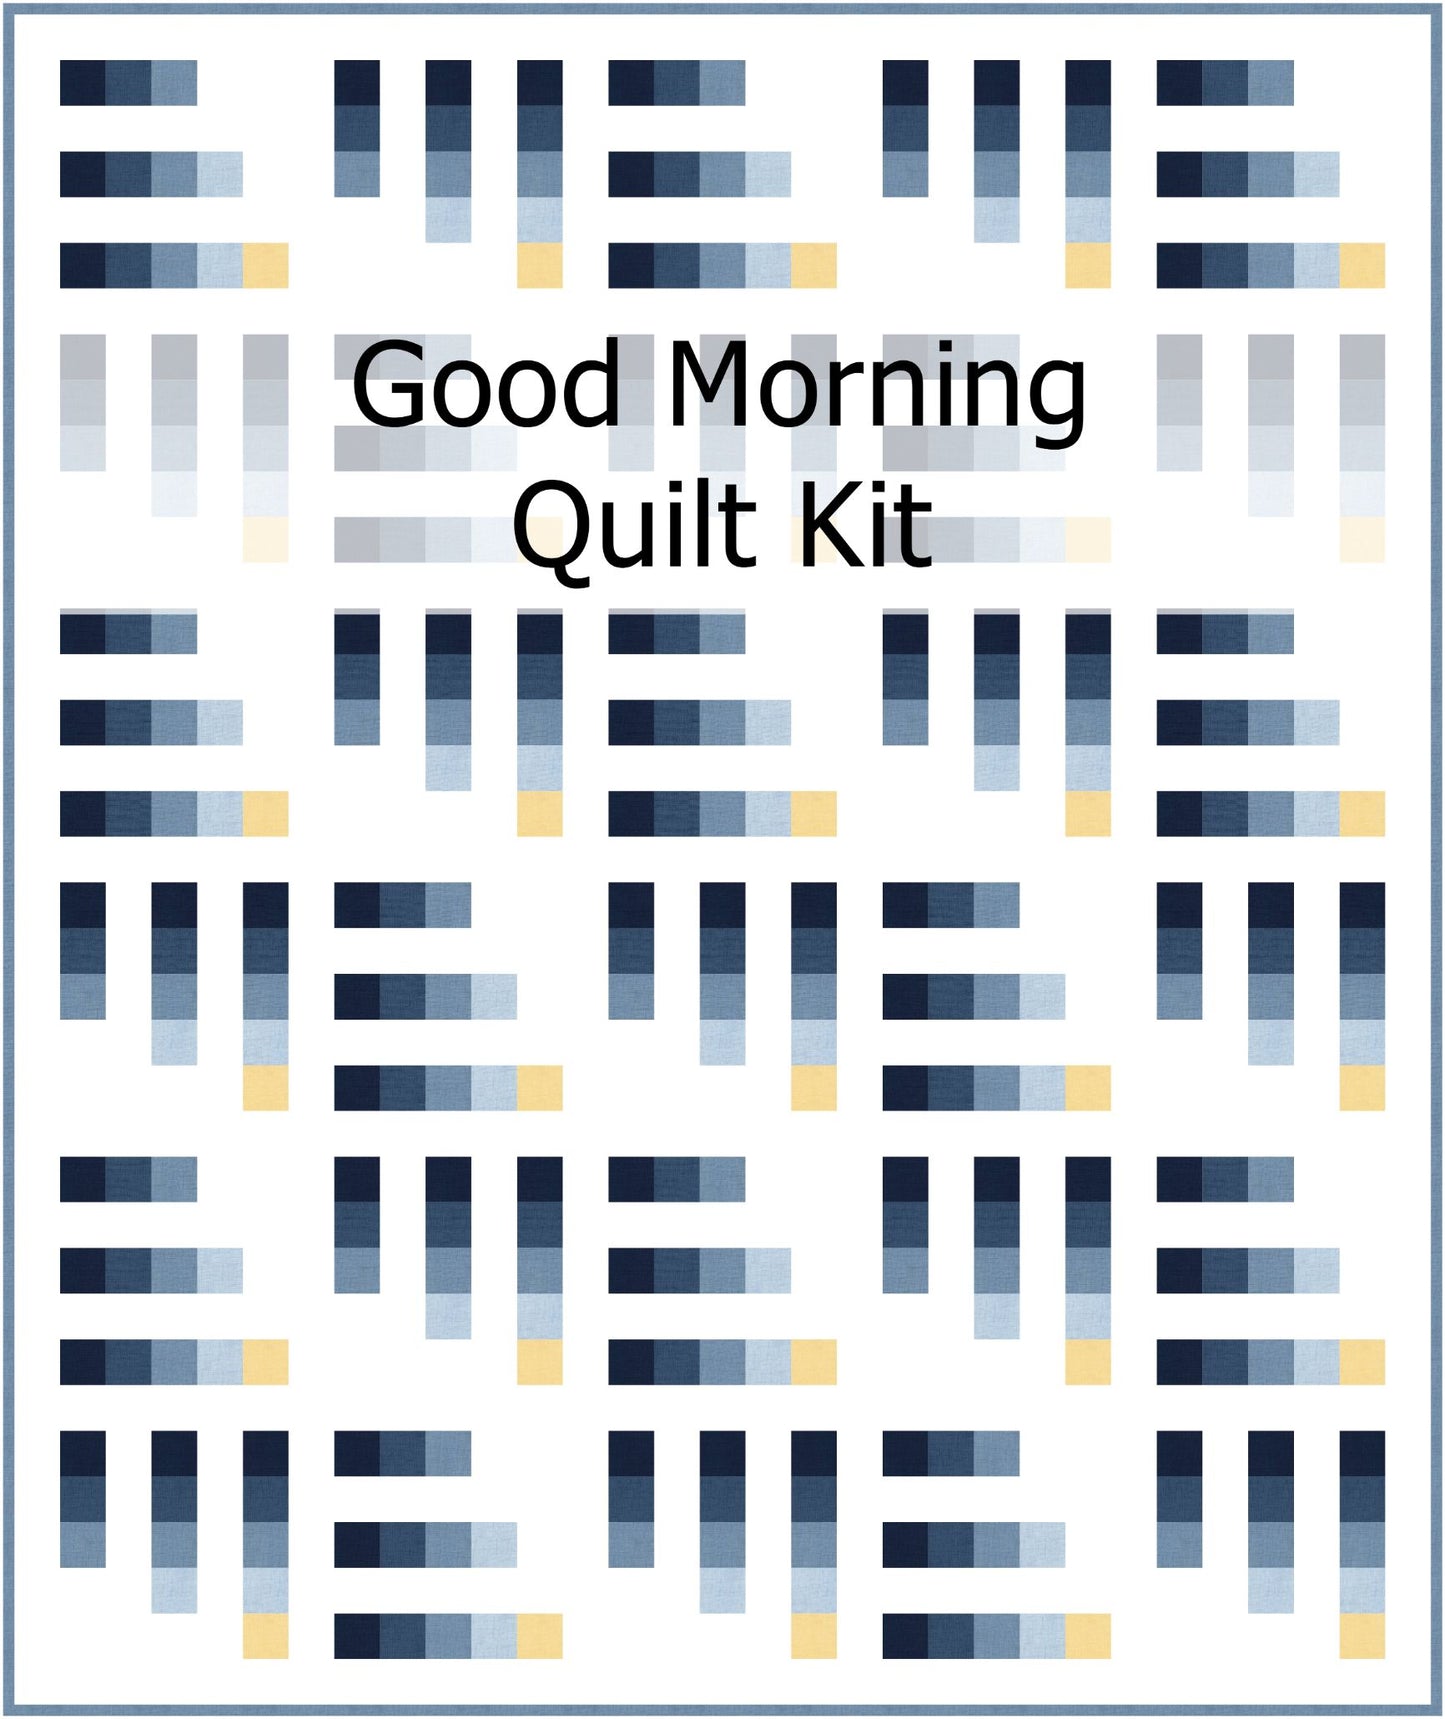 Good Morning Quilt Kit in Blues - Throw Size